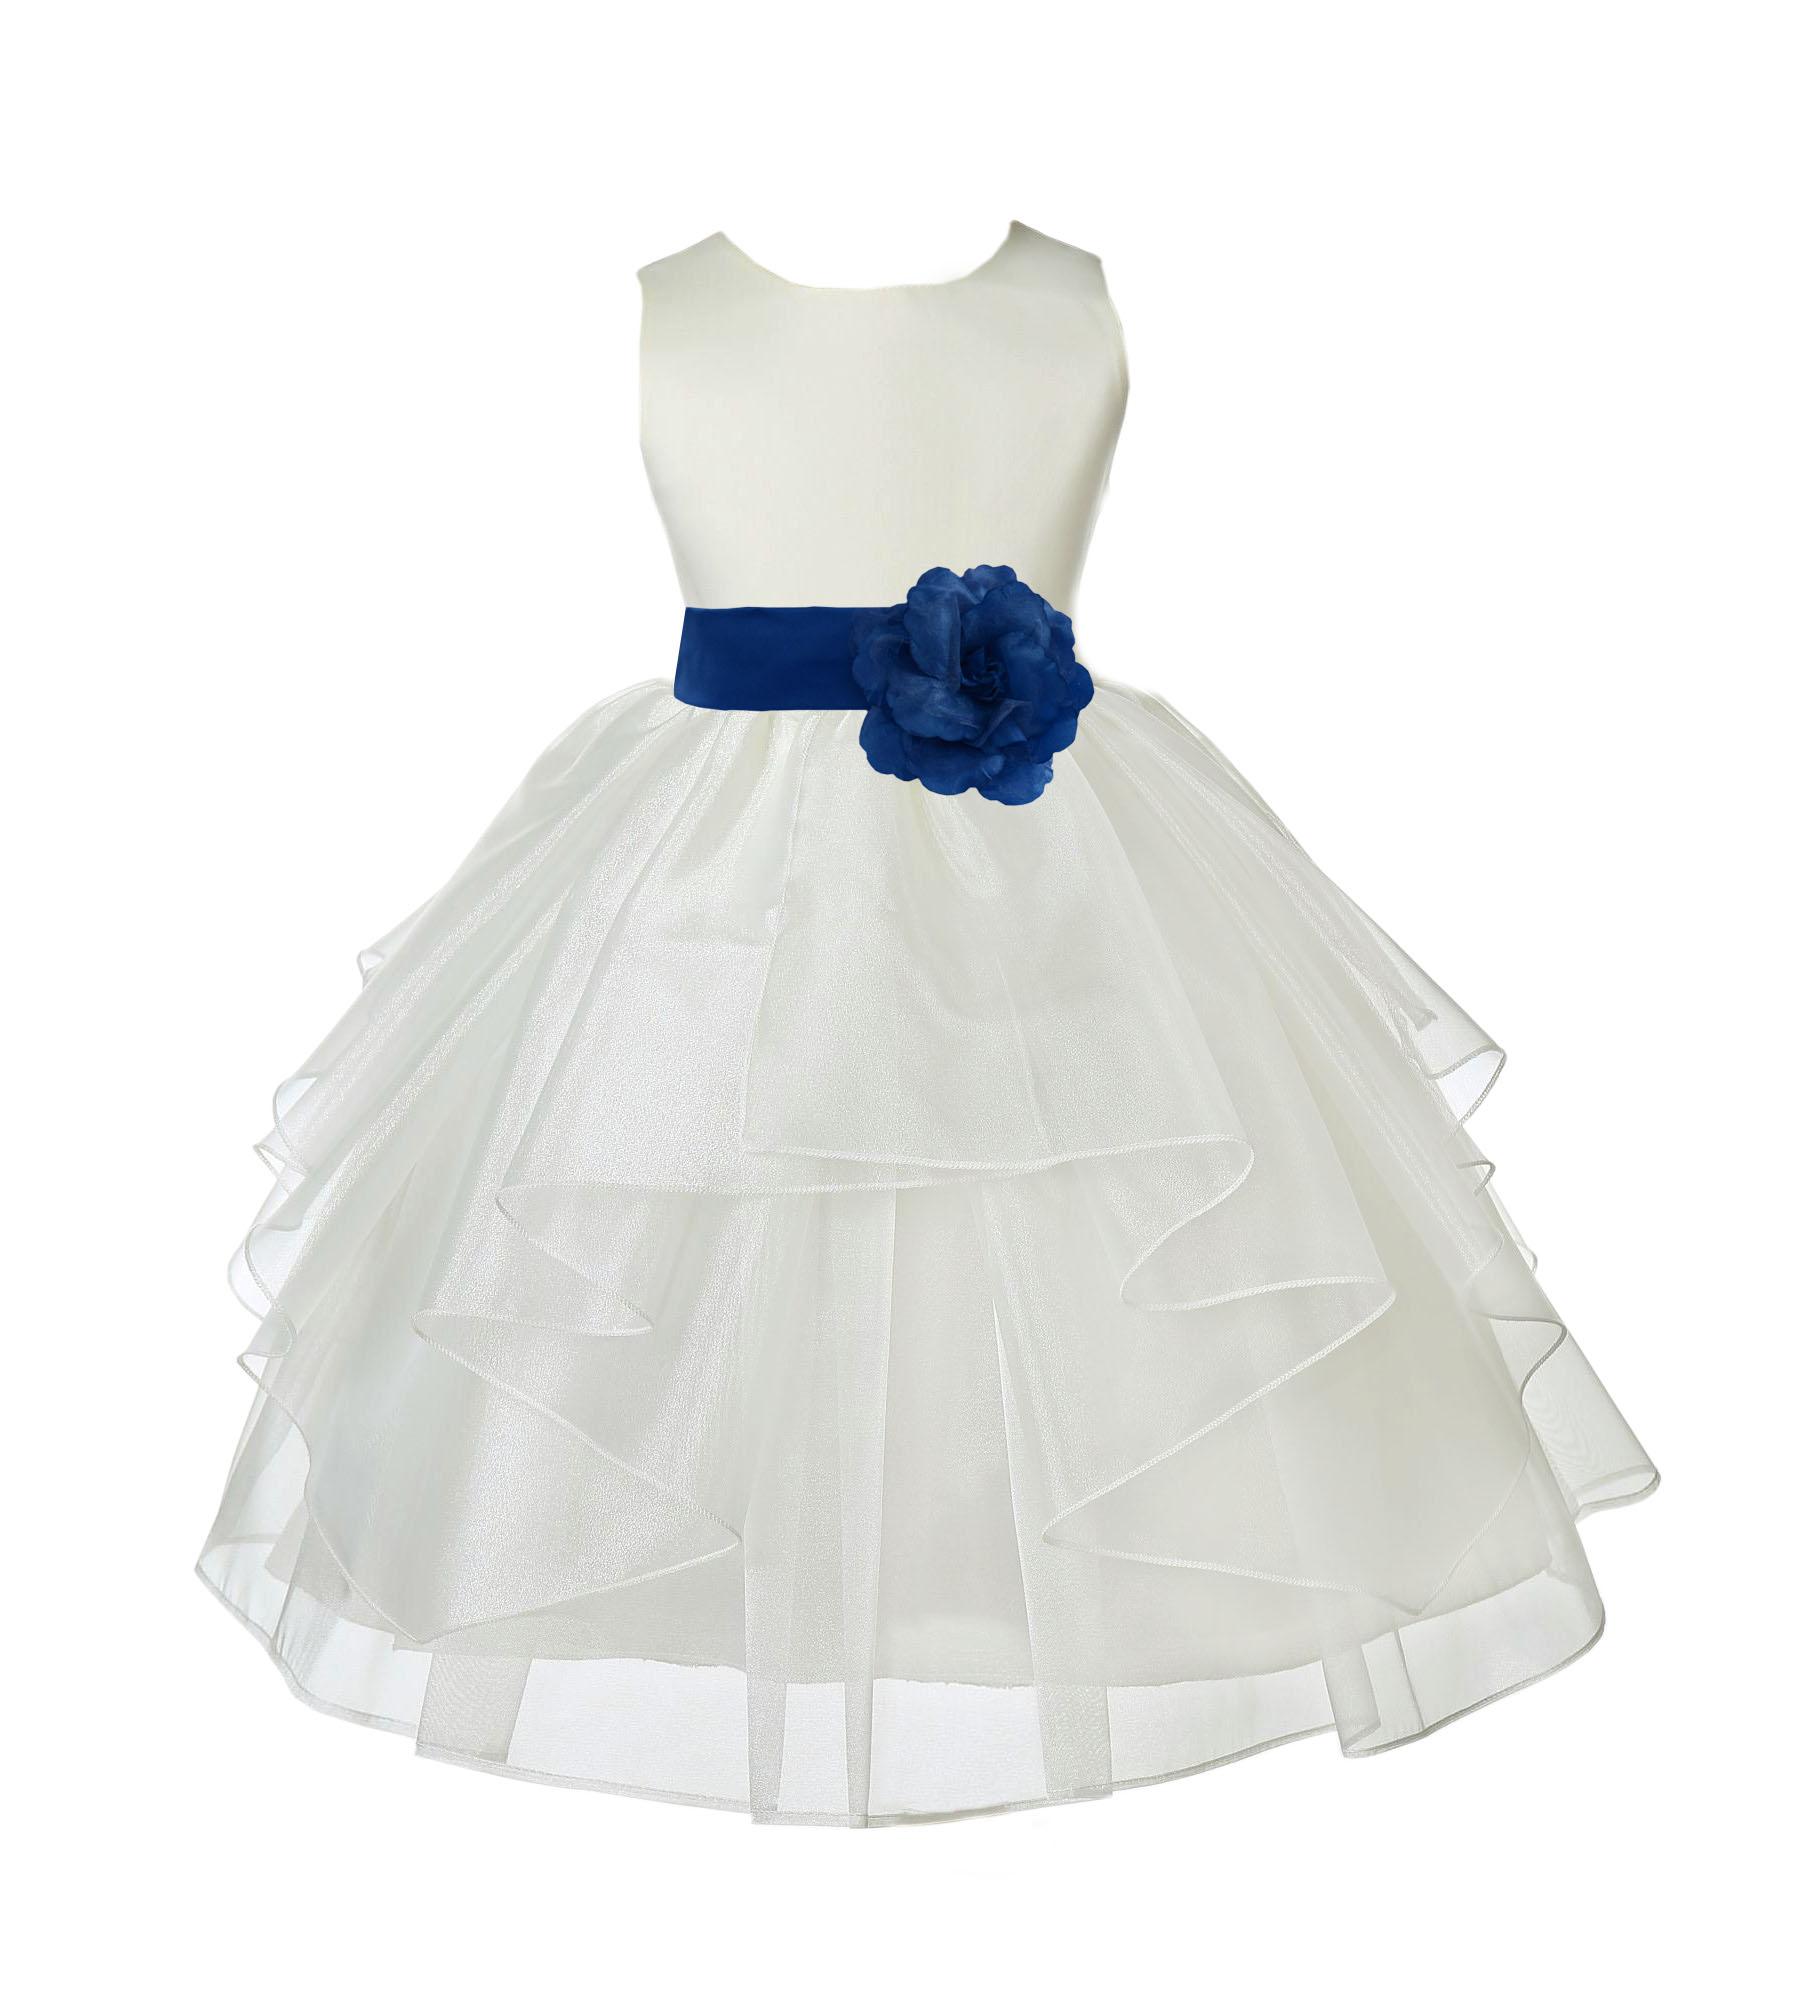 Ekidsbridal Wedding Pageant Ivory Shimmering Organza Flower Girl Dress Toddler Special Occasions Bridesmaid Handmade 4613t